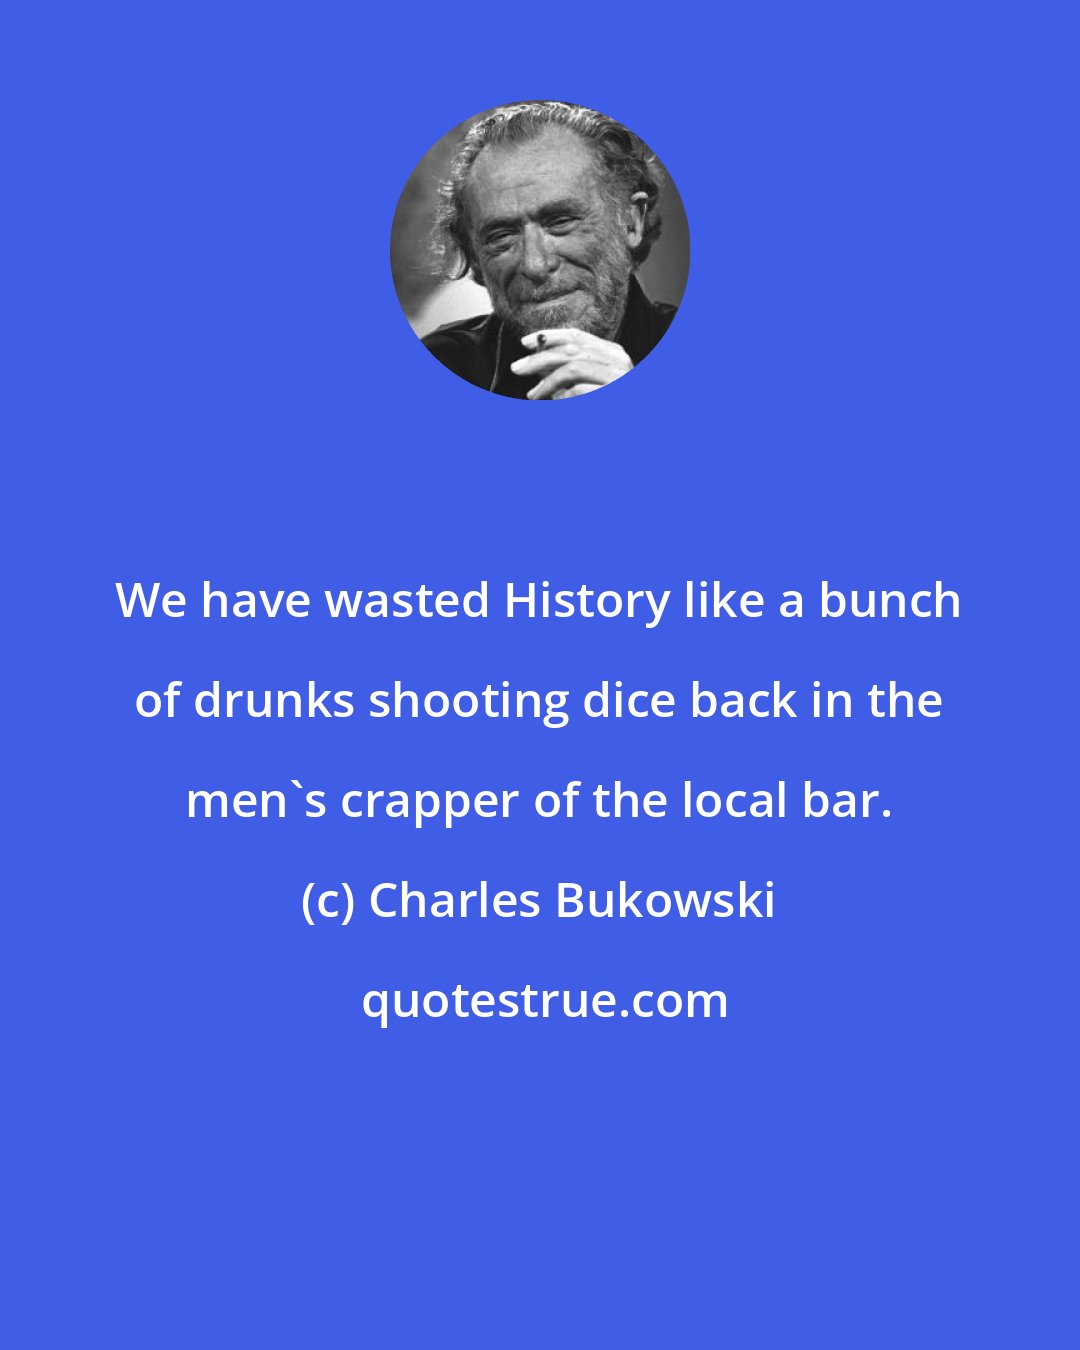 Charles Bukowski: We have wasted History like a bunch of drunks shooting dice back in the men's crapper of the local bar.